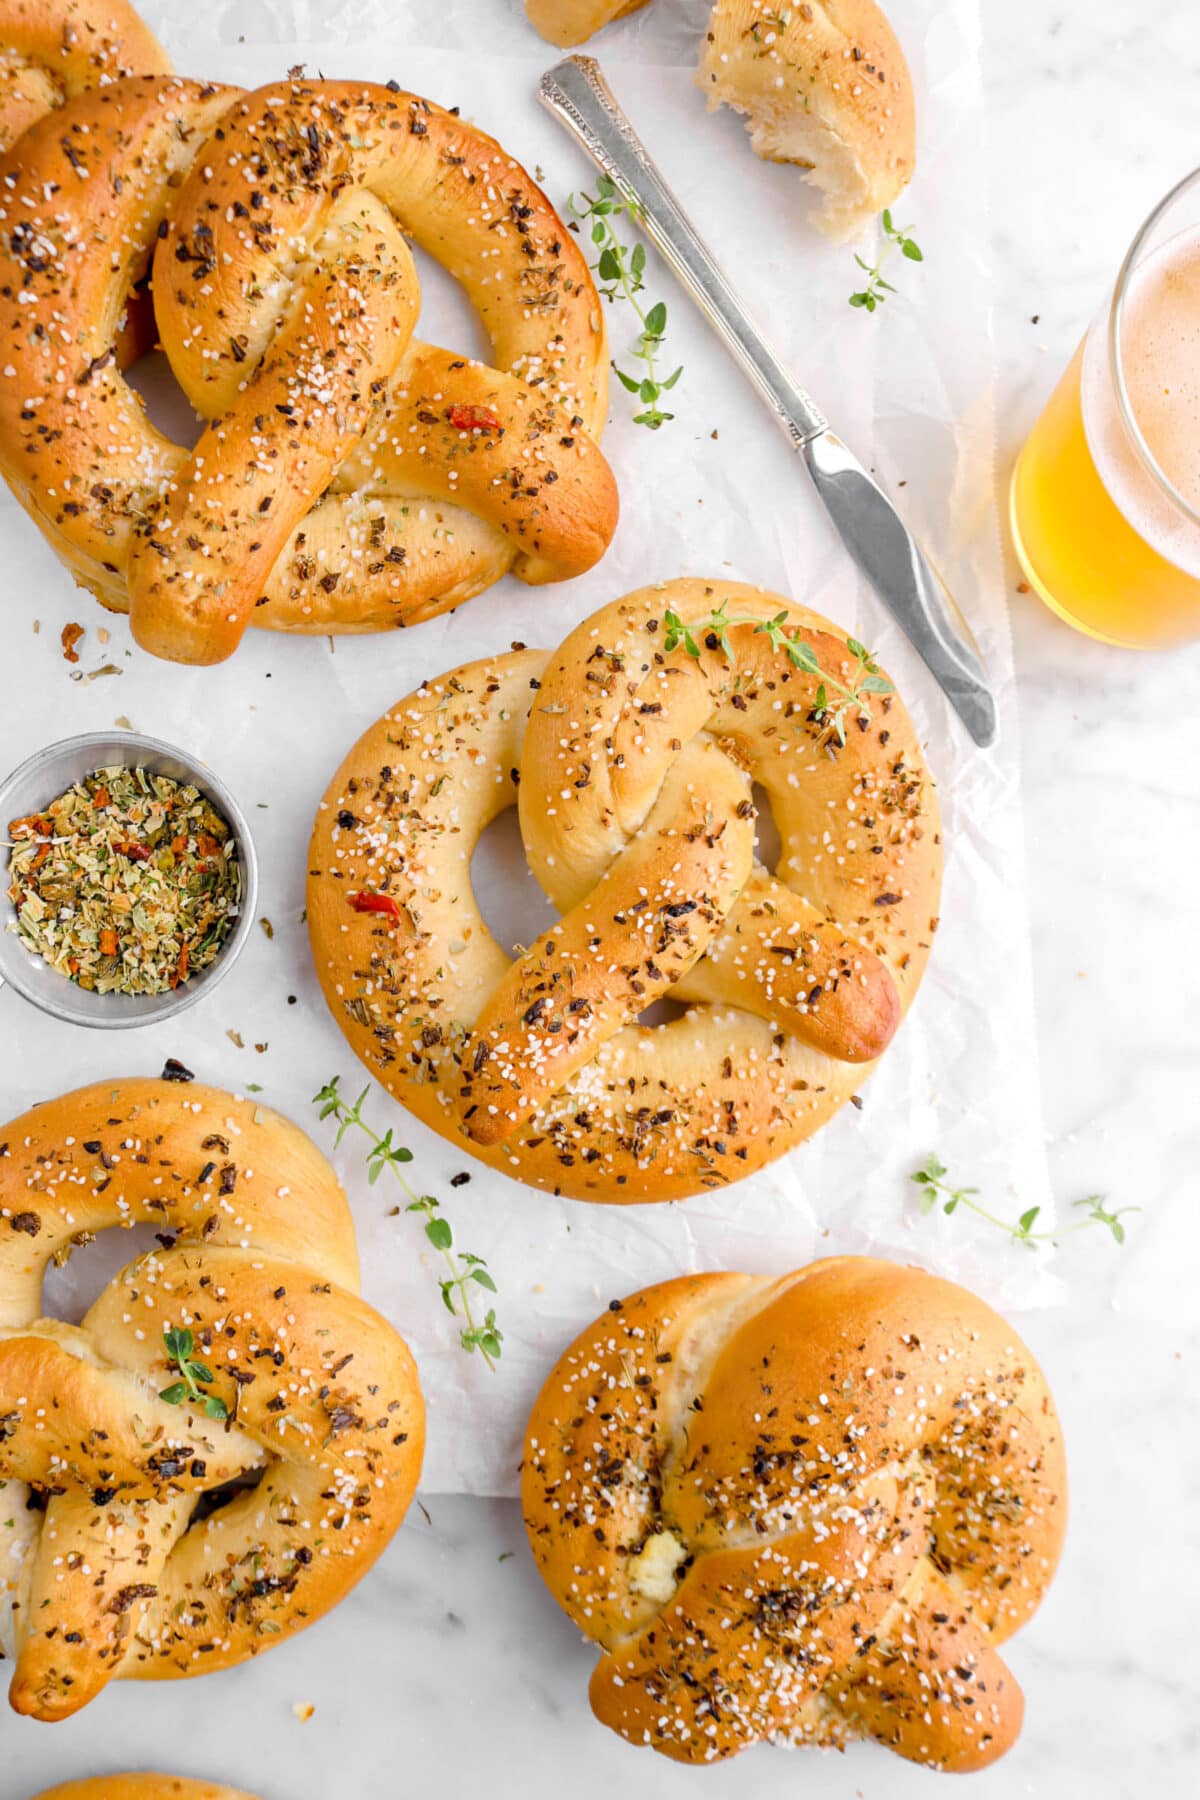 close up of four pretzels with measuring cup of dried herbs beside, glass of beer, a knife, and thyme sprigs around.